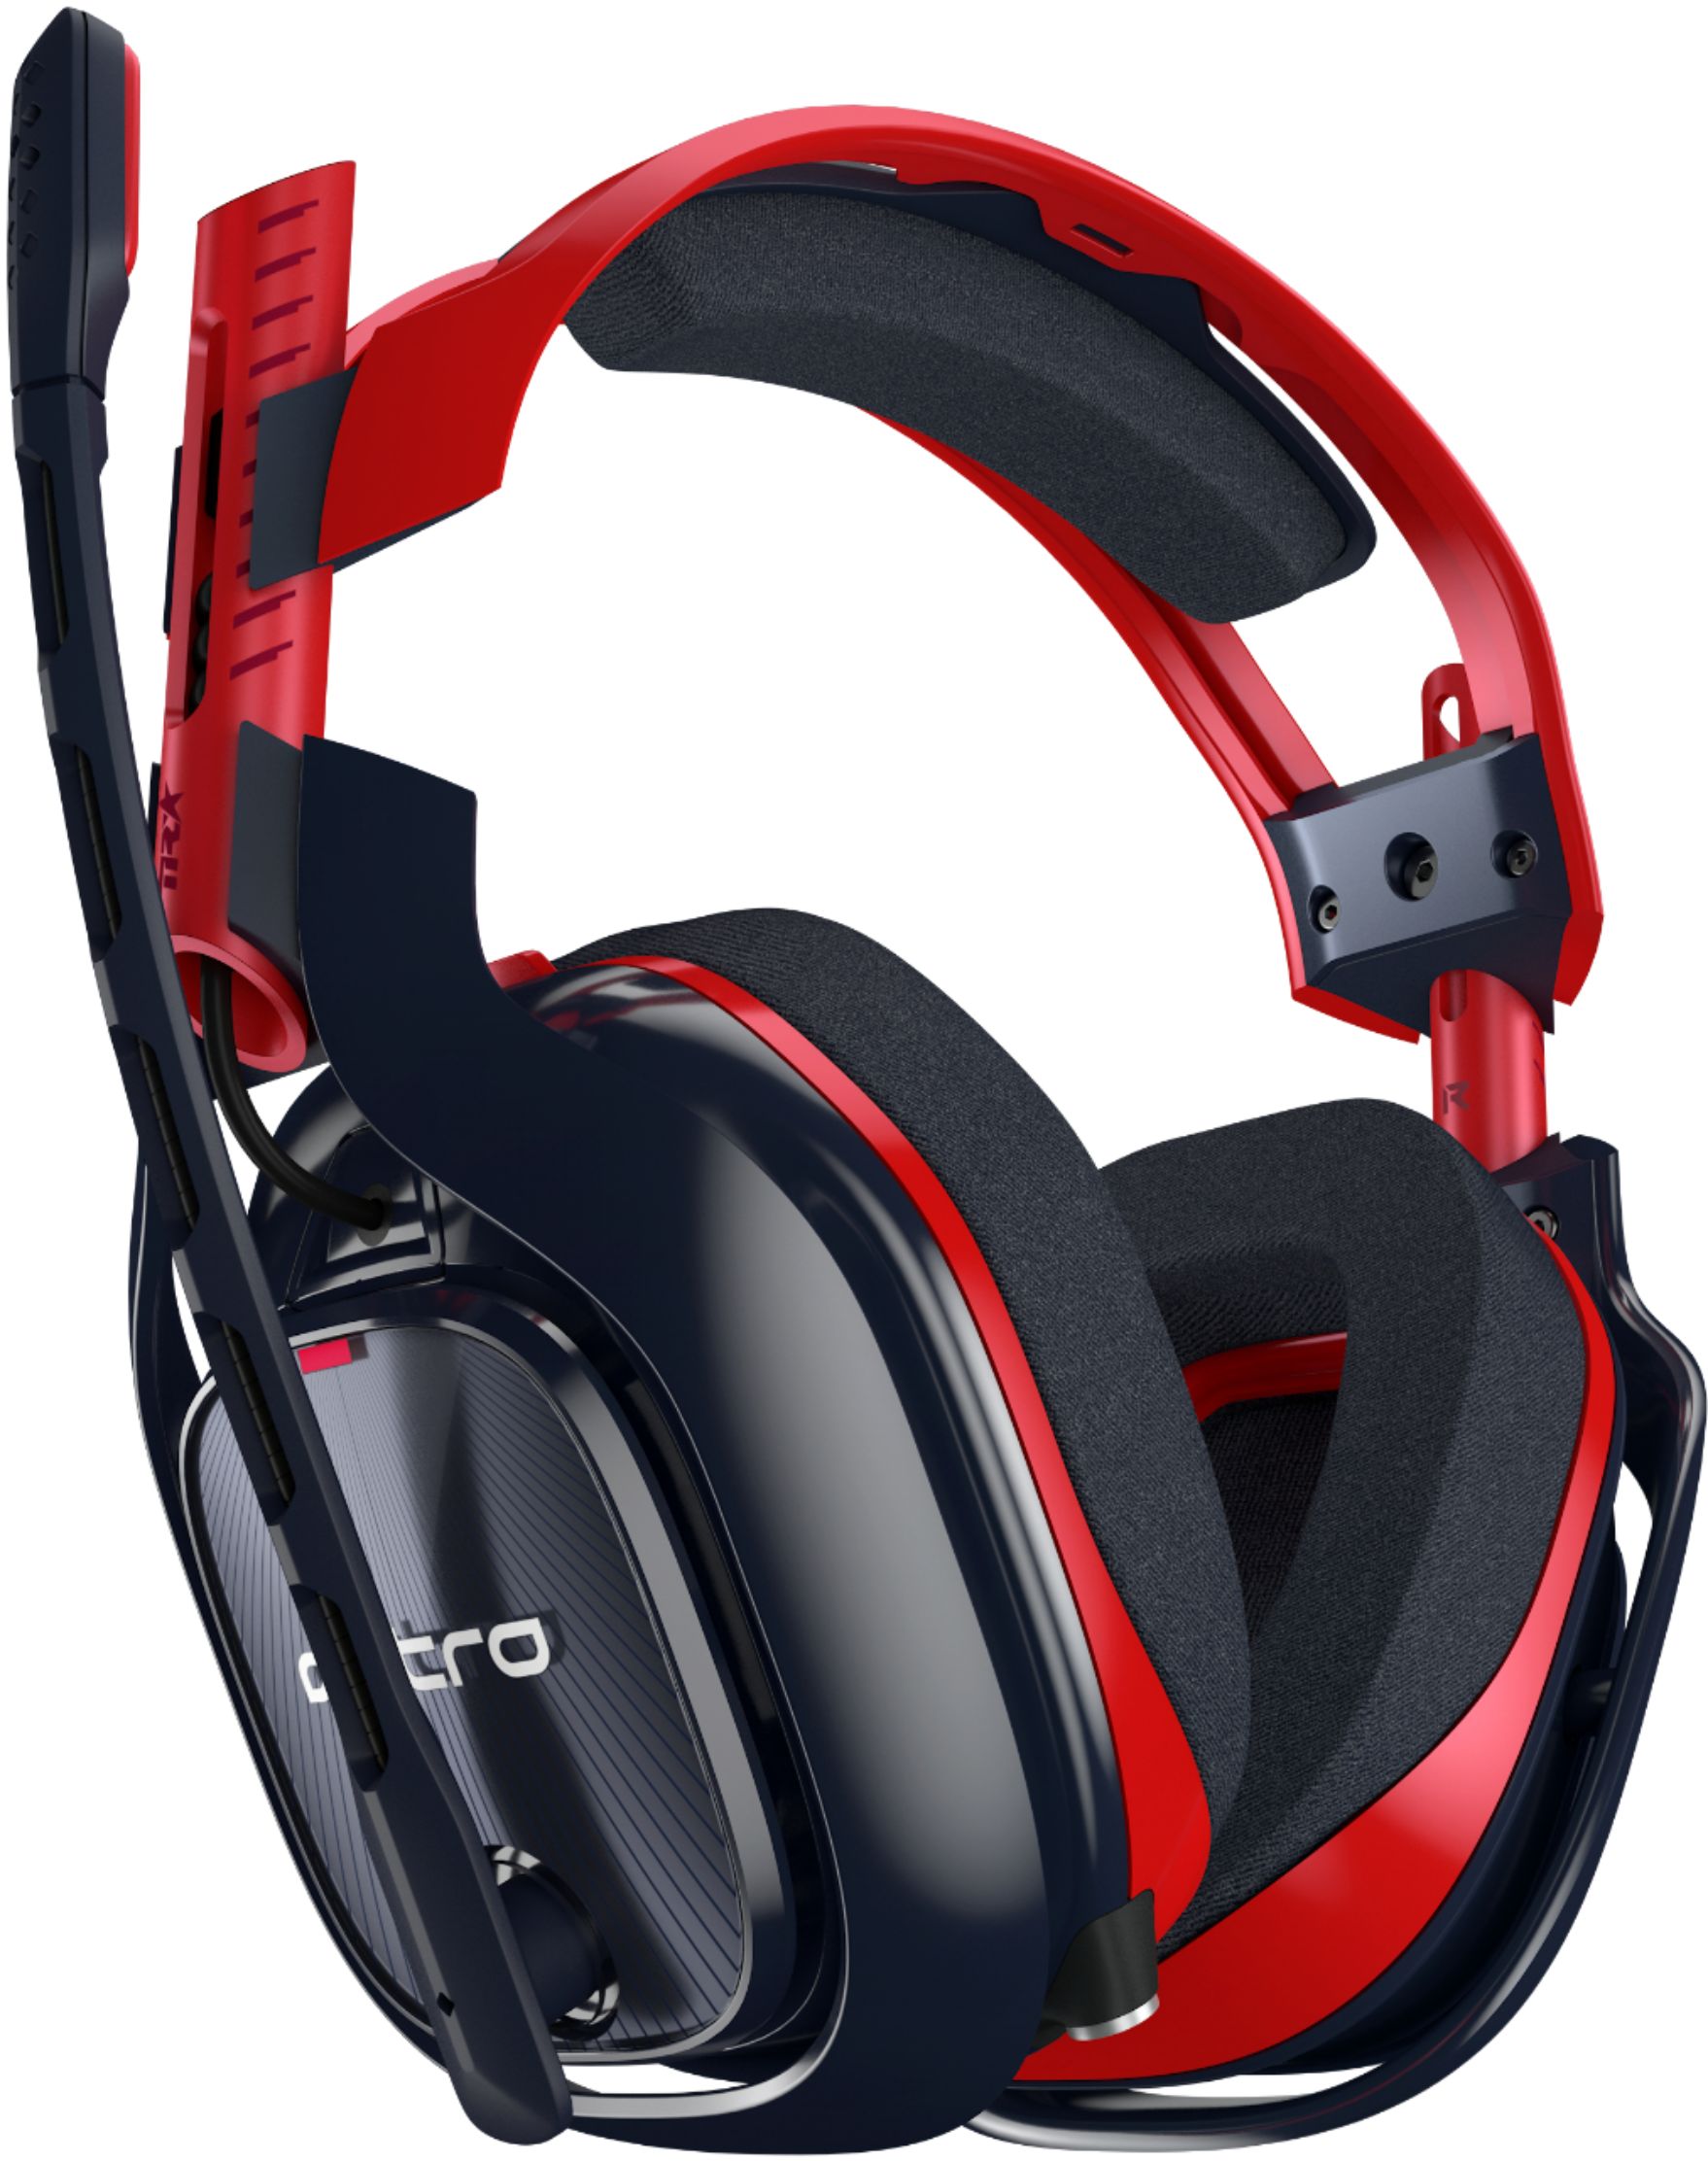 Astro Gaming Astro 0 Tr Wired Stereo Gaming Headset For Xbox Series X S Xbox One Playstation 5 Playstation 4 Red Black 939 Best Buy